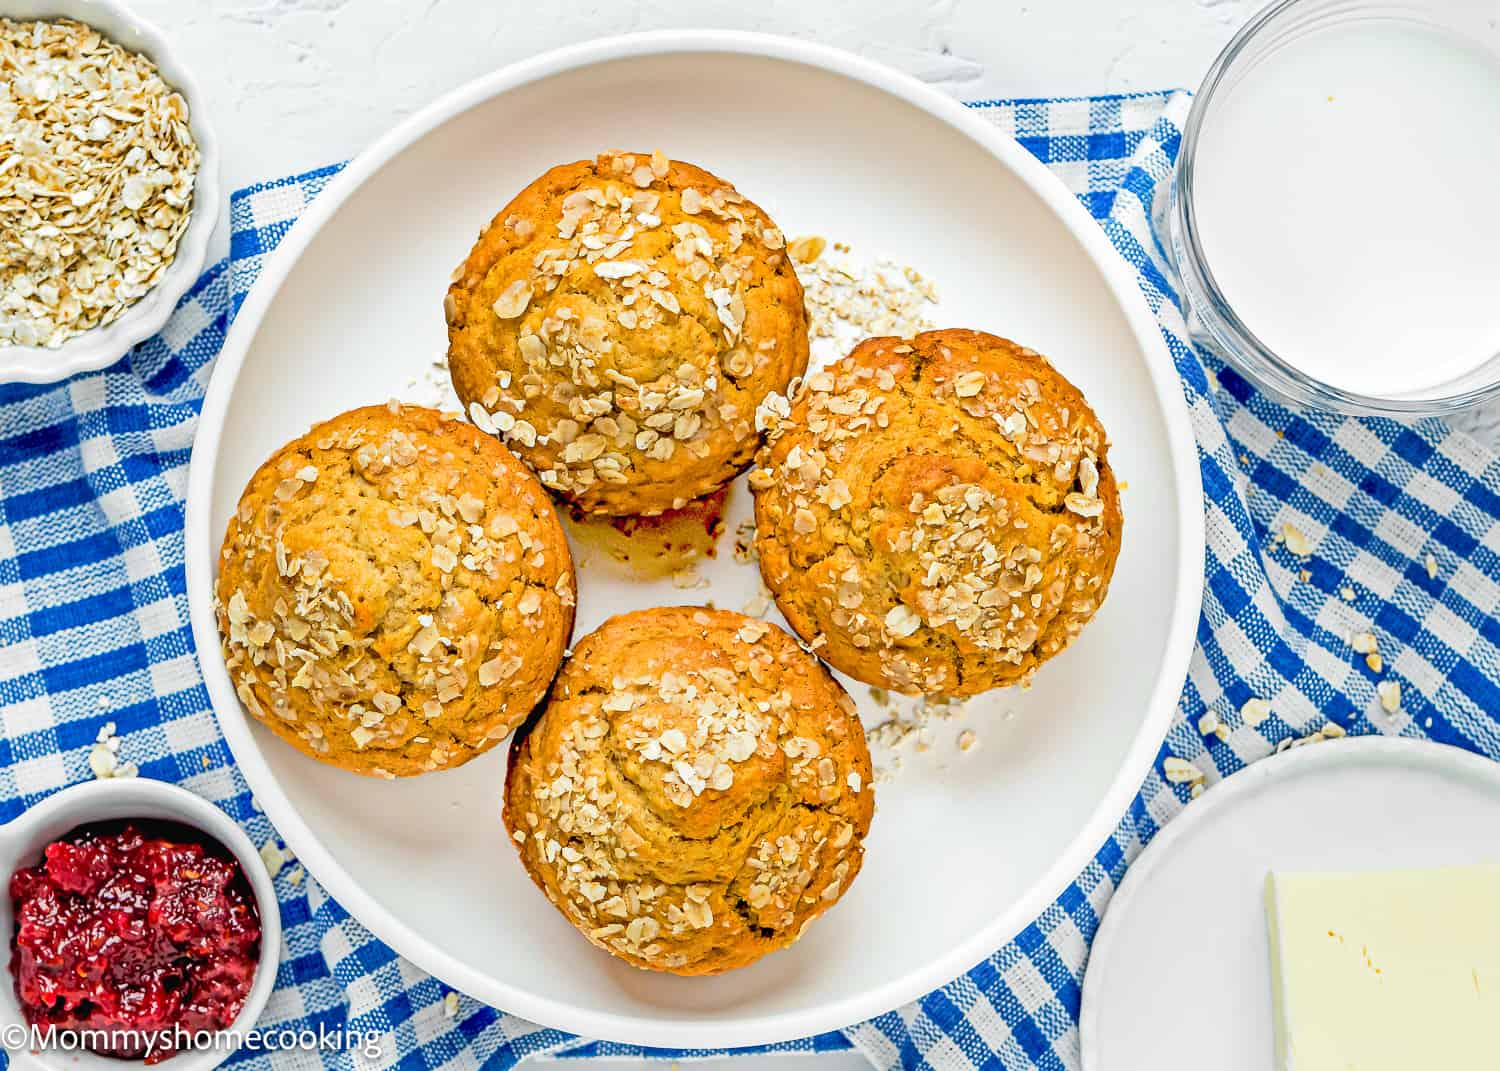 Easy oat muffins made with jam and oats, containing no eggs, no sugar, and dairy.